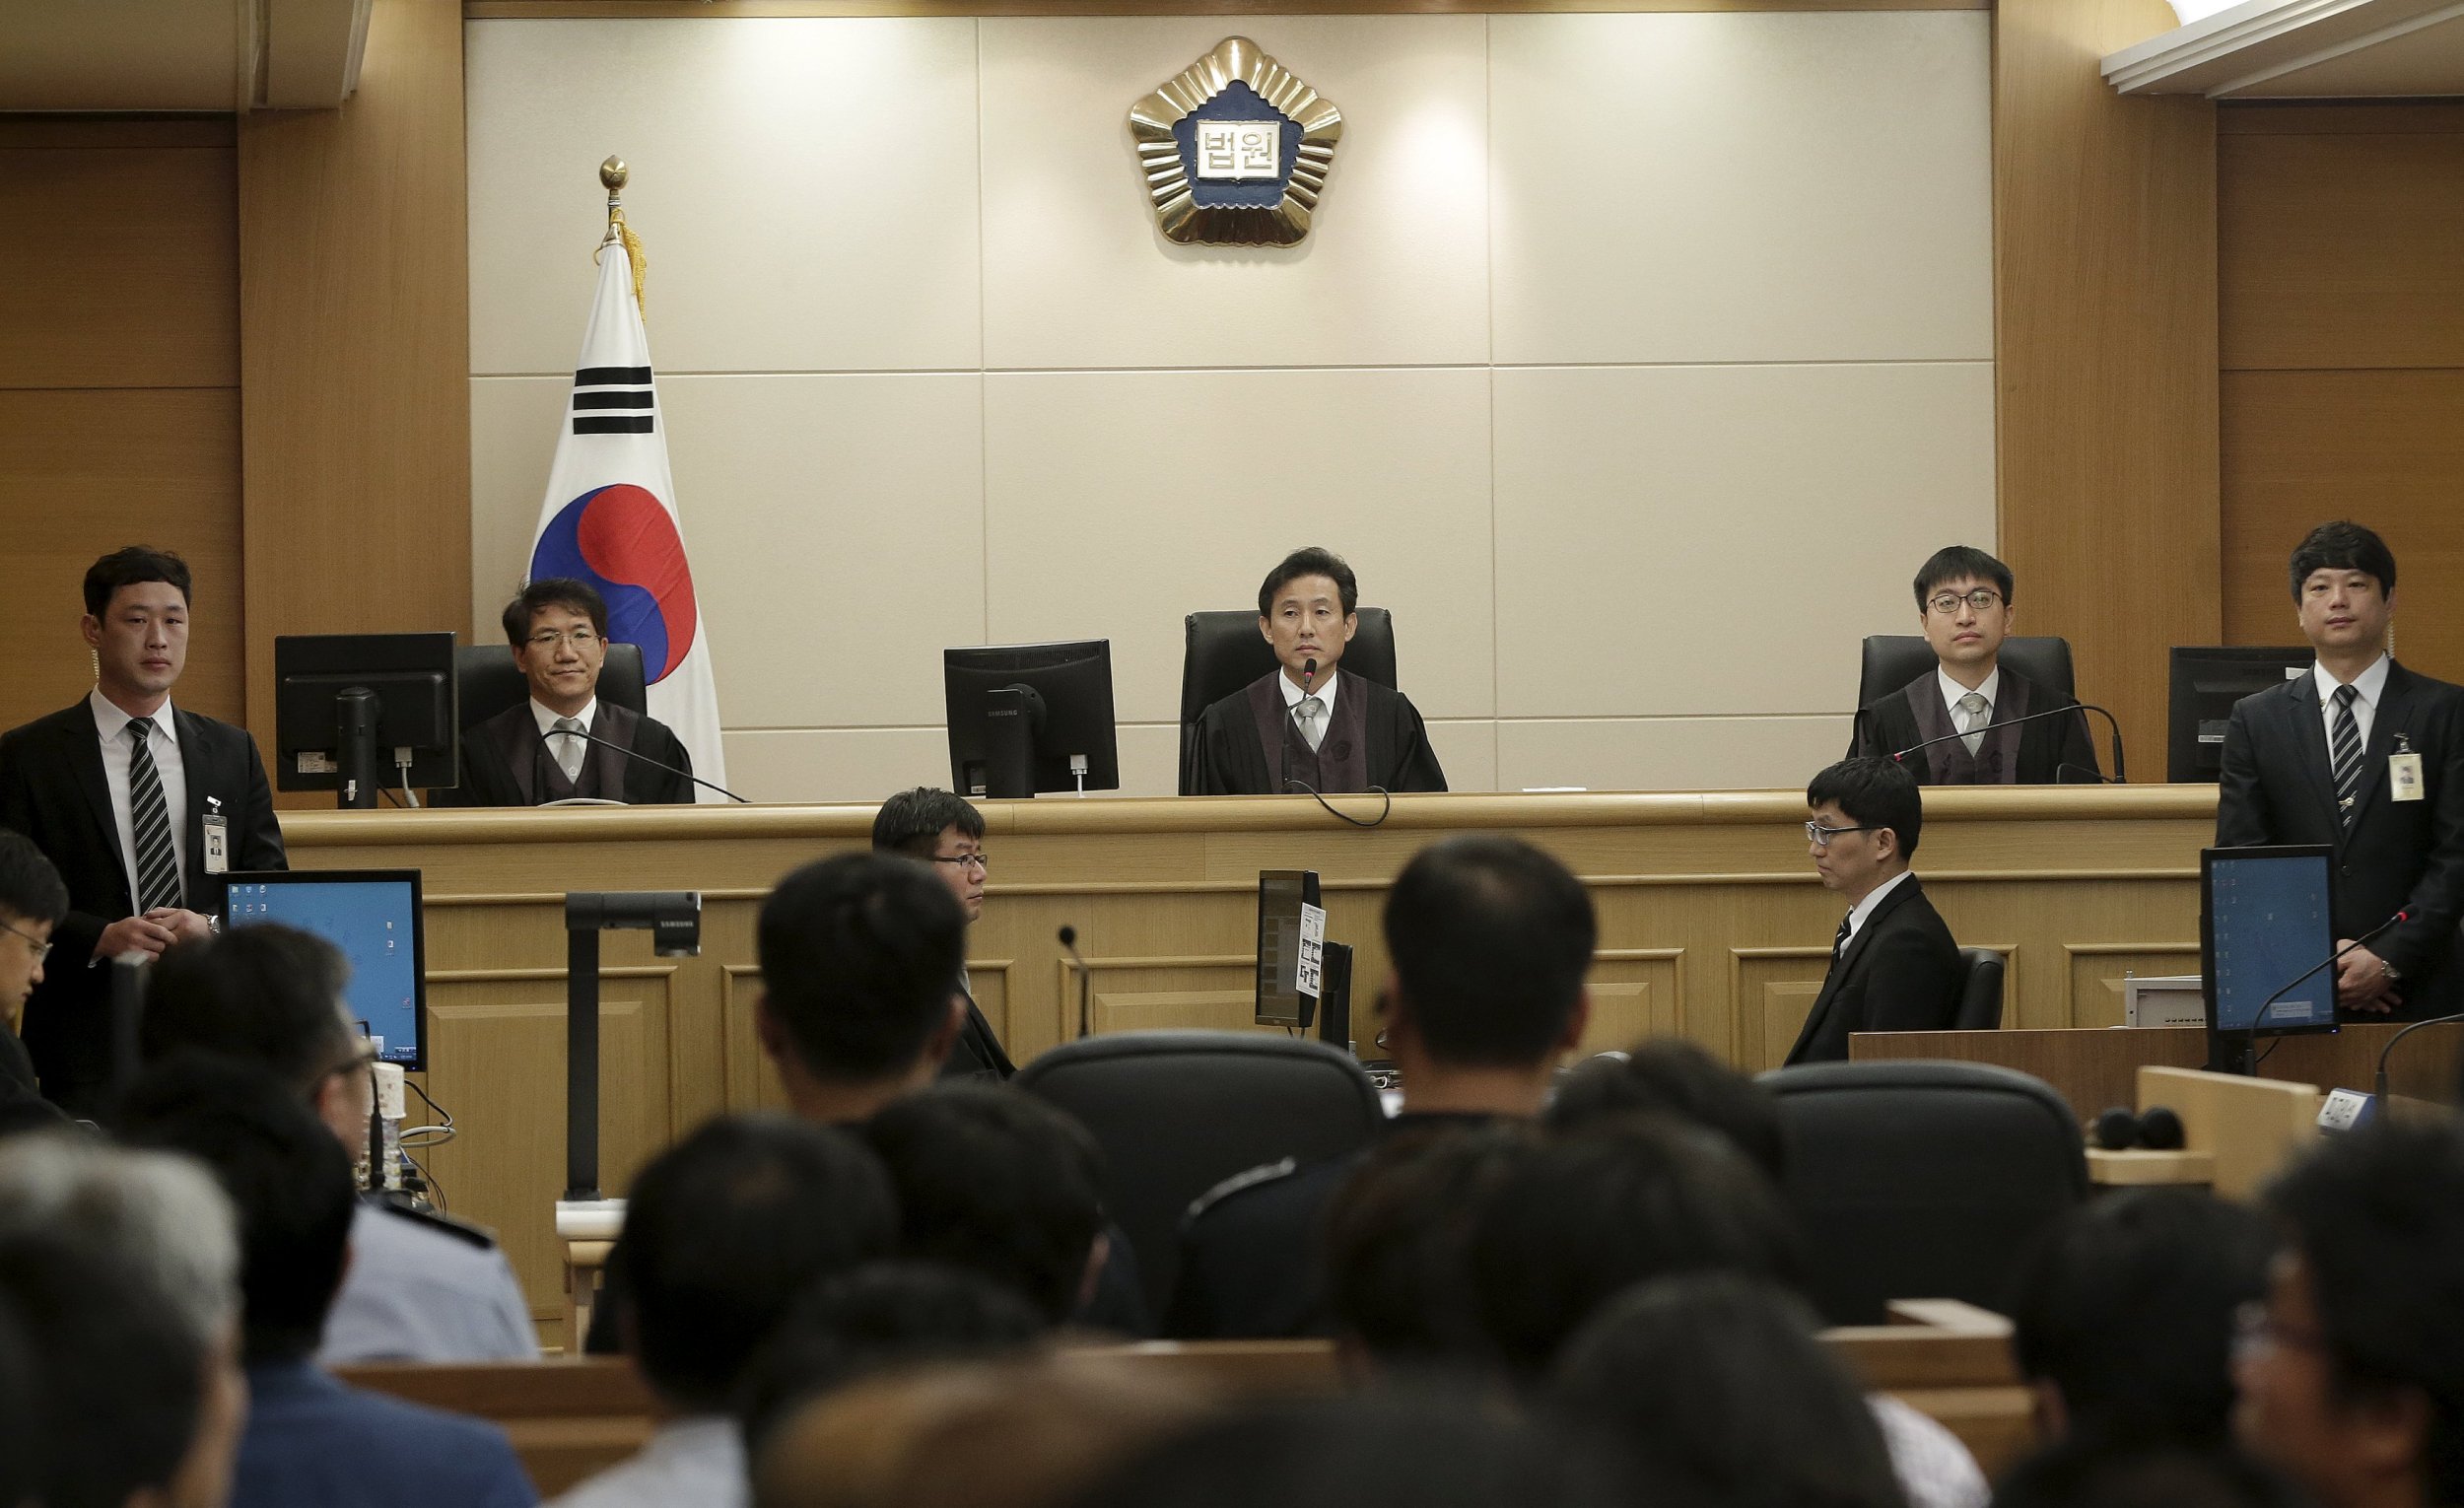 South Korean Ferry Sewols Captain Lee Jun Seok Sentenced To Life In Jail By Appeals Court 